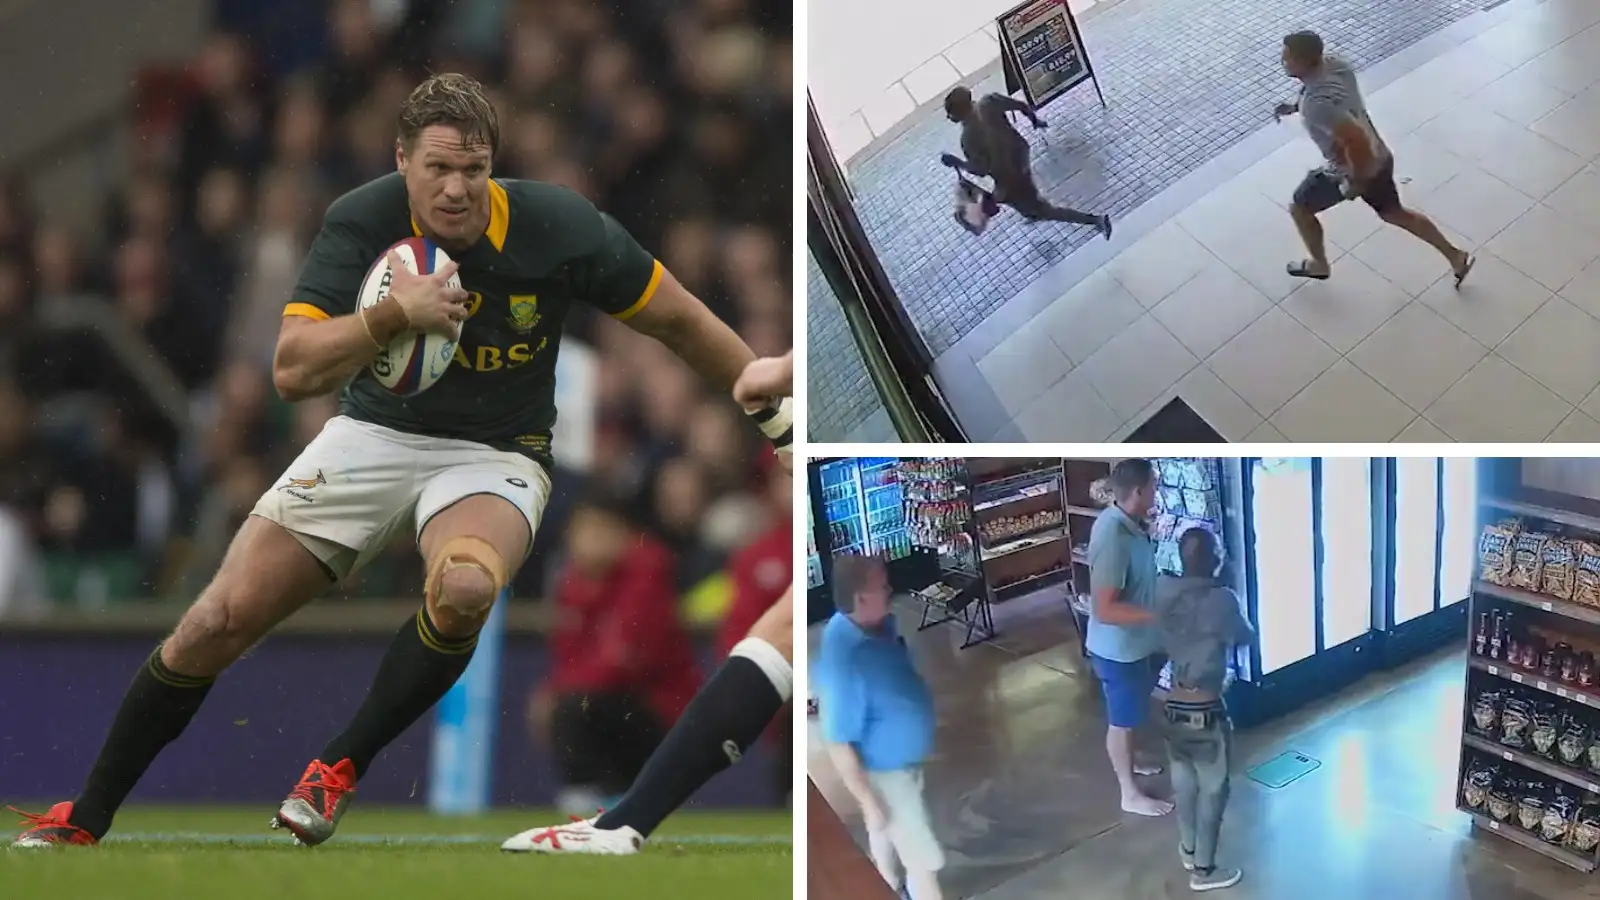 Former Springbok captain and centre Jean de Villiers has been trending in South Africa this week after he caught a shoplifter at a local butchery.